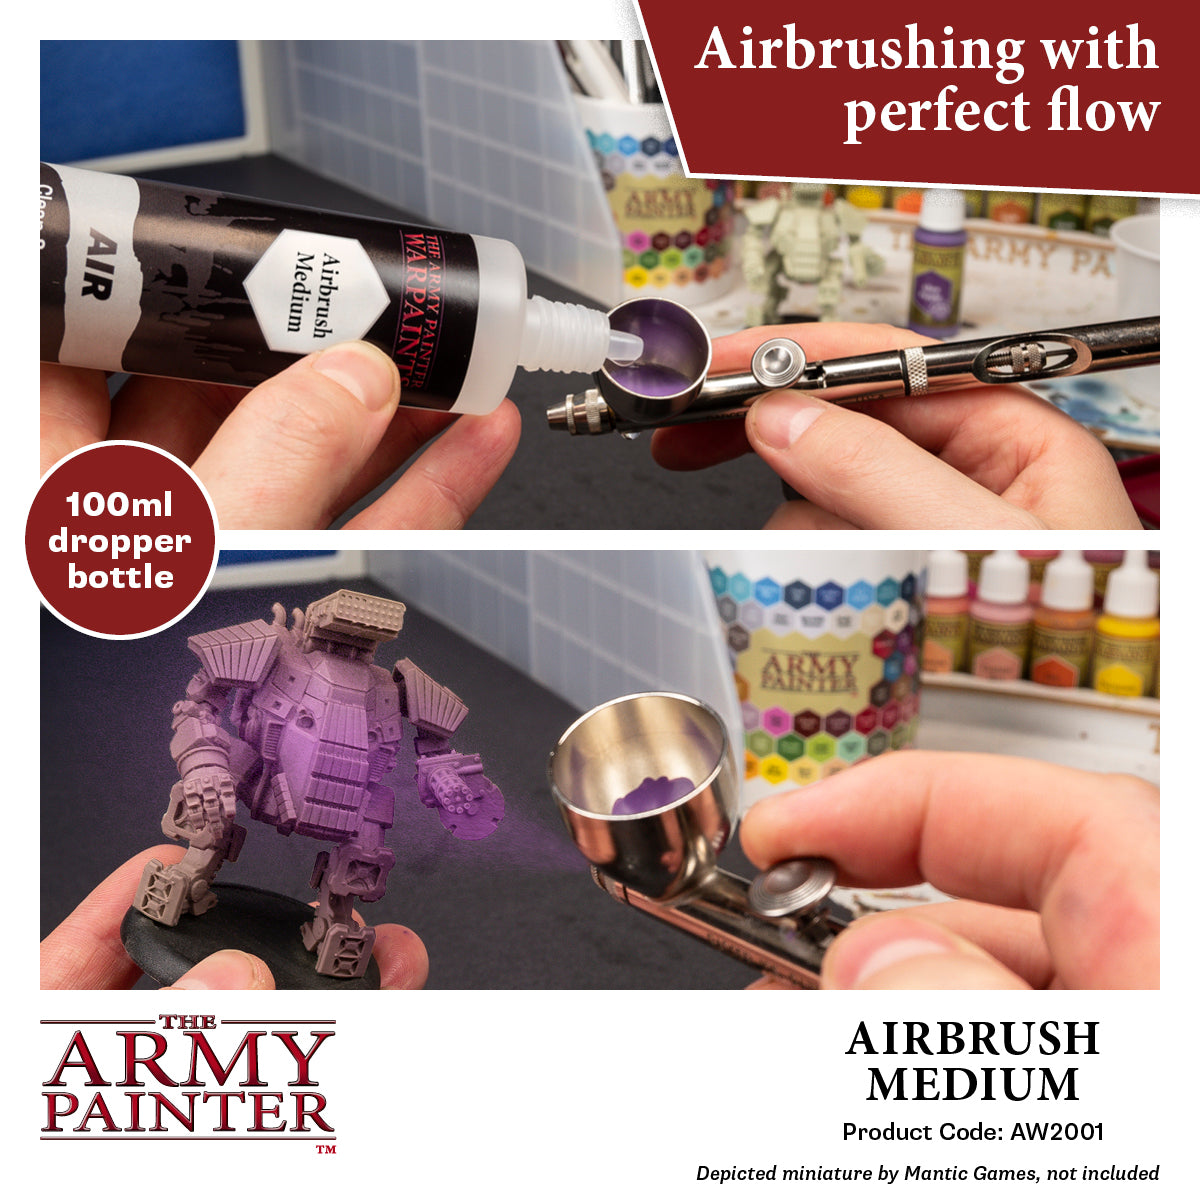 New Army Painter Air Paints Are Perfect for Airbrushing!